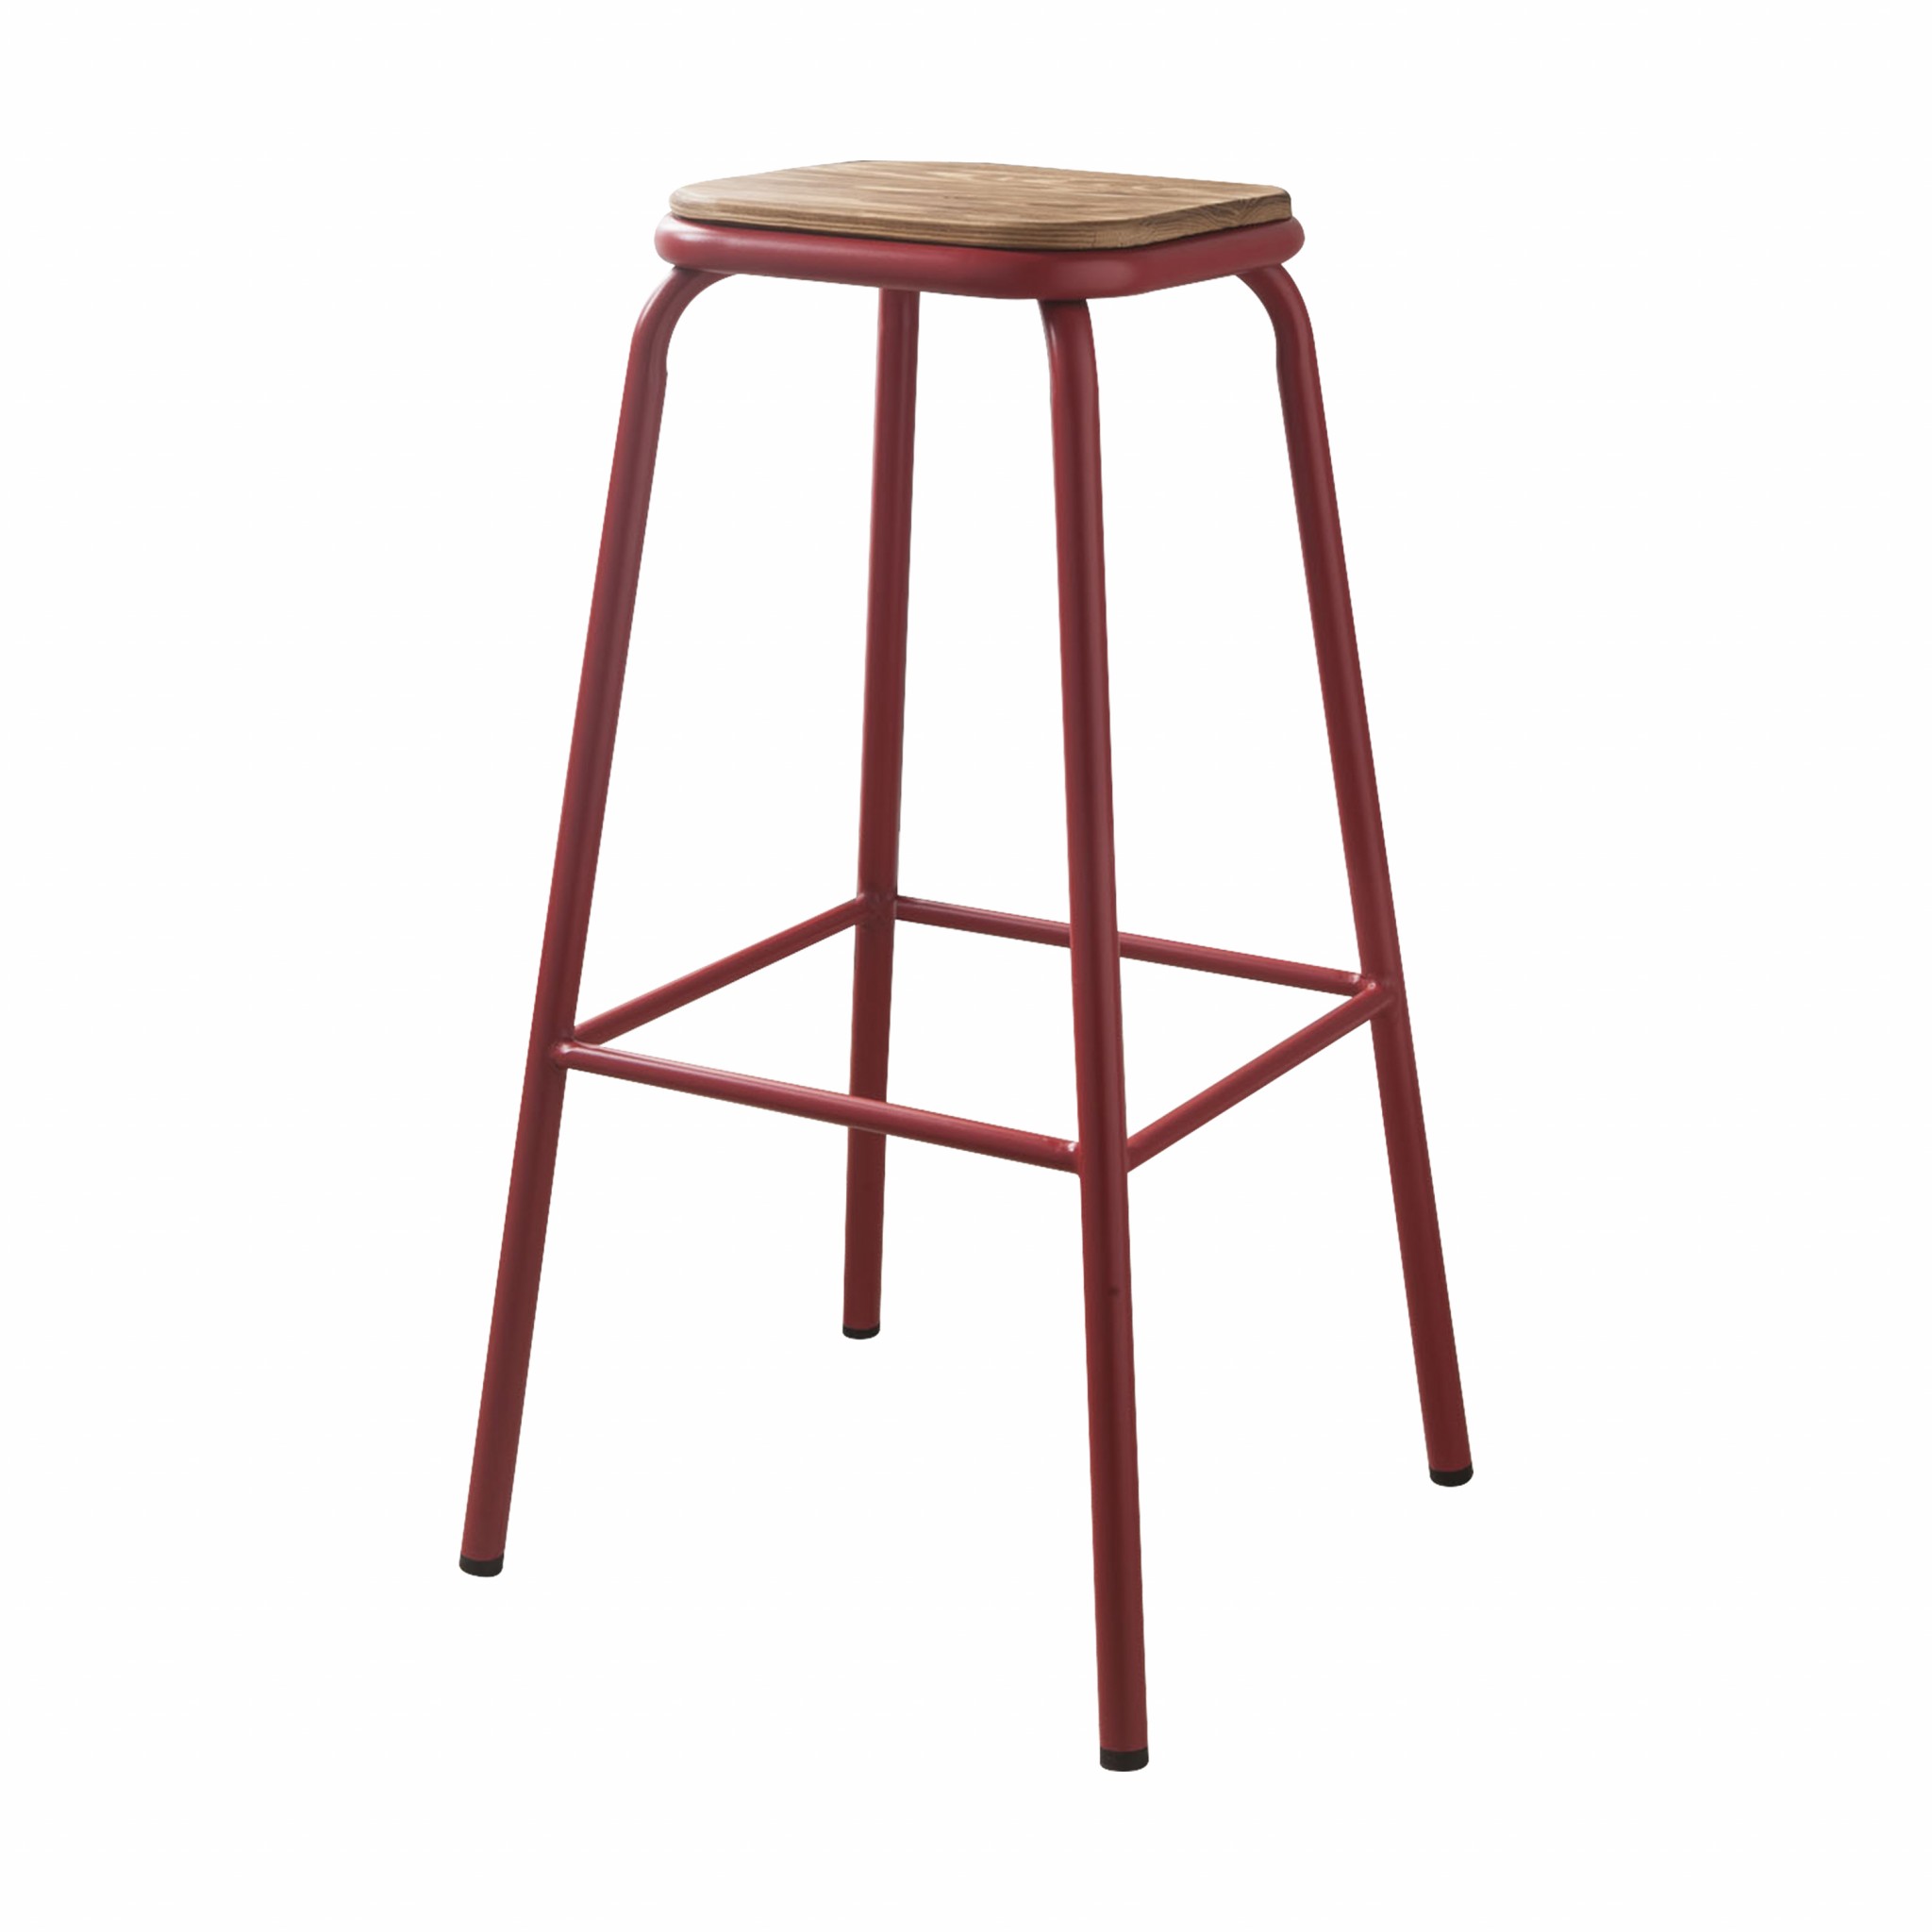 Set of 2 - 30" Red and Natural Metal base Backless Stools